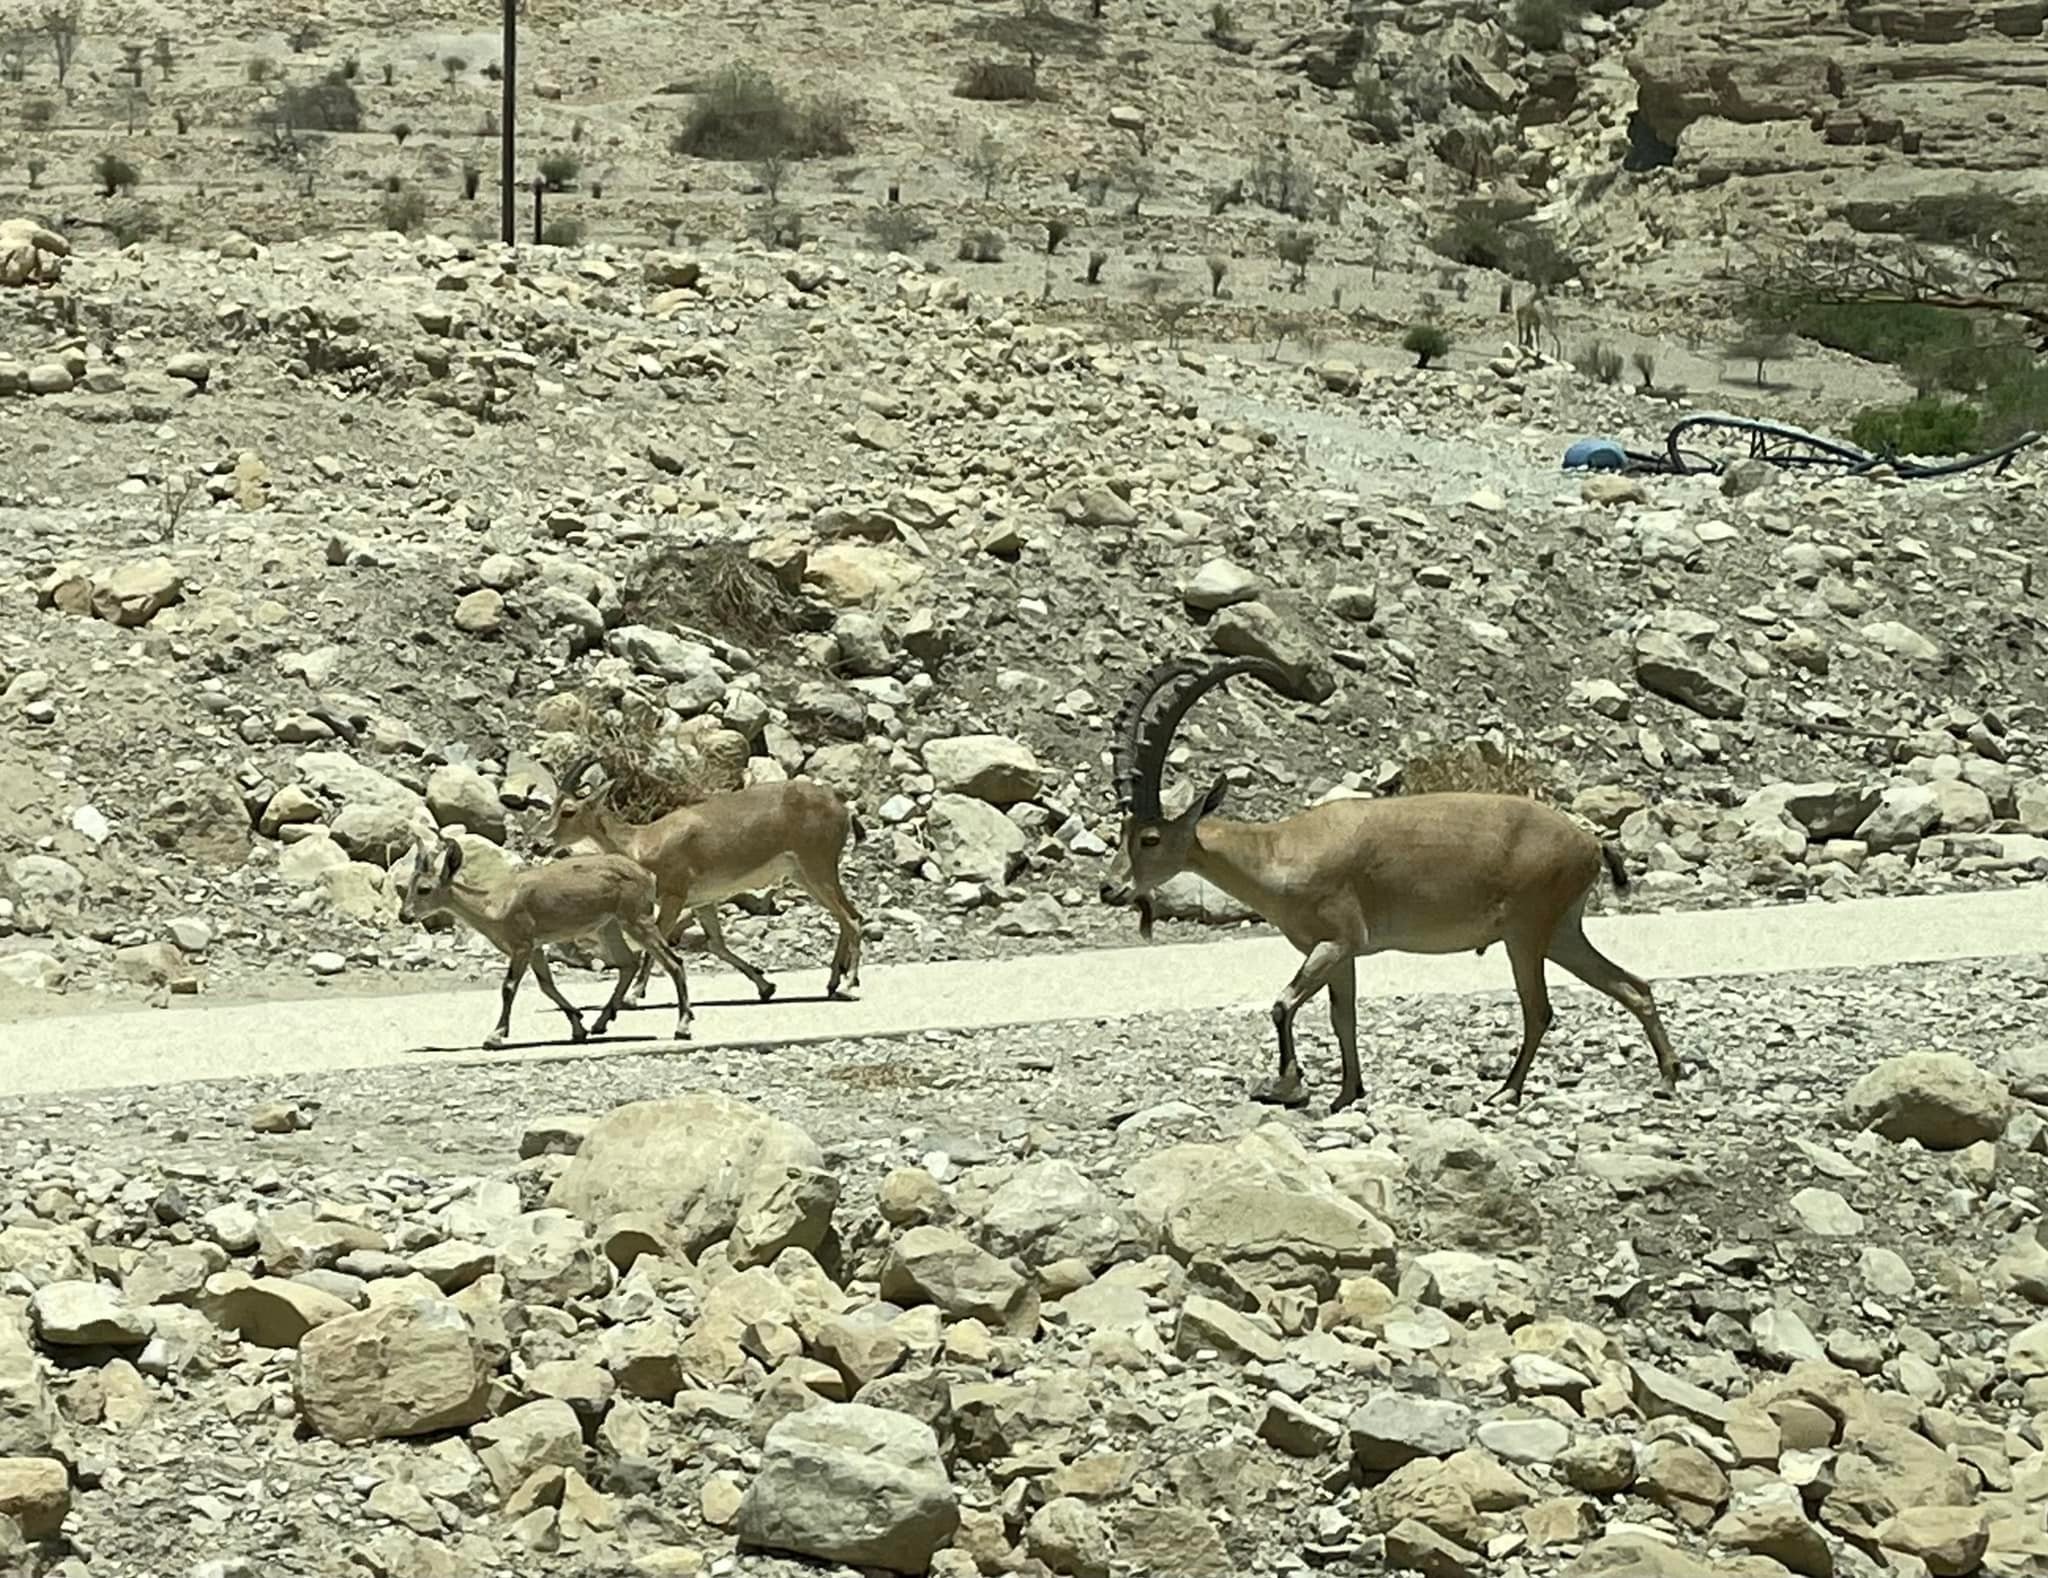  We next went to En Gedi. It’s name means goat Spring. It got its name from the ibex that are native to this region. We were greeted by a few as we drove in. 